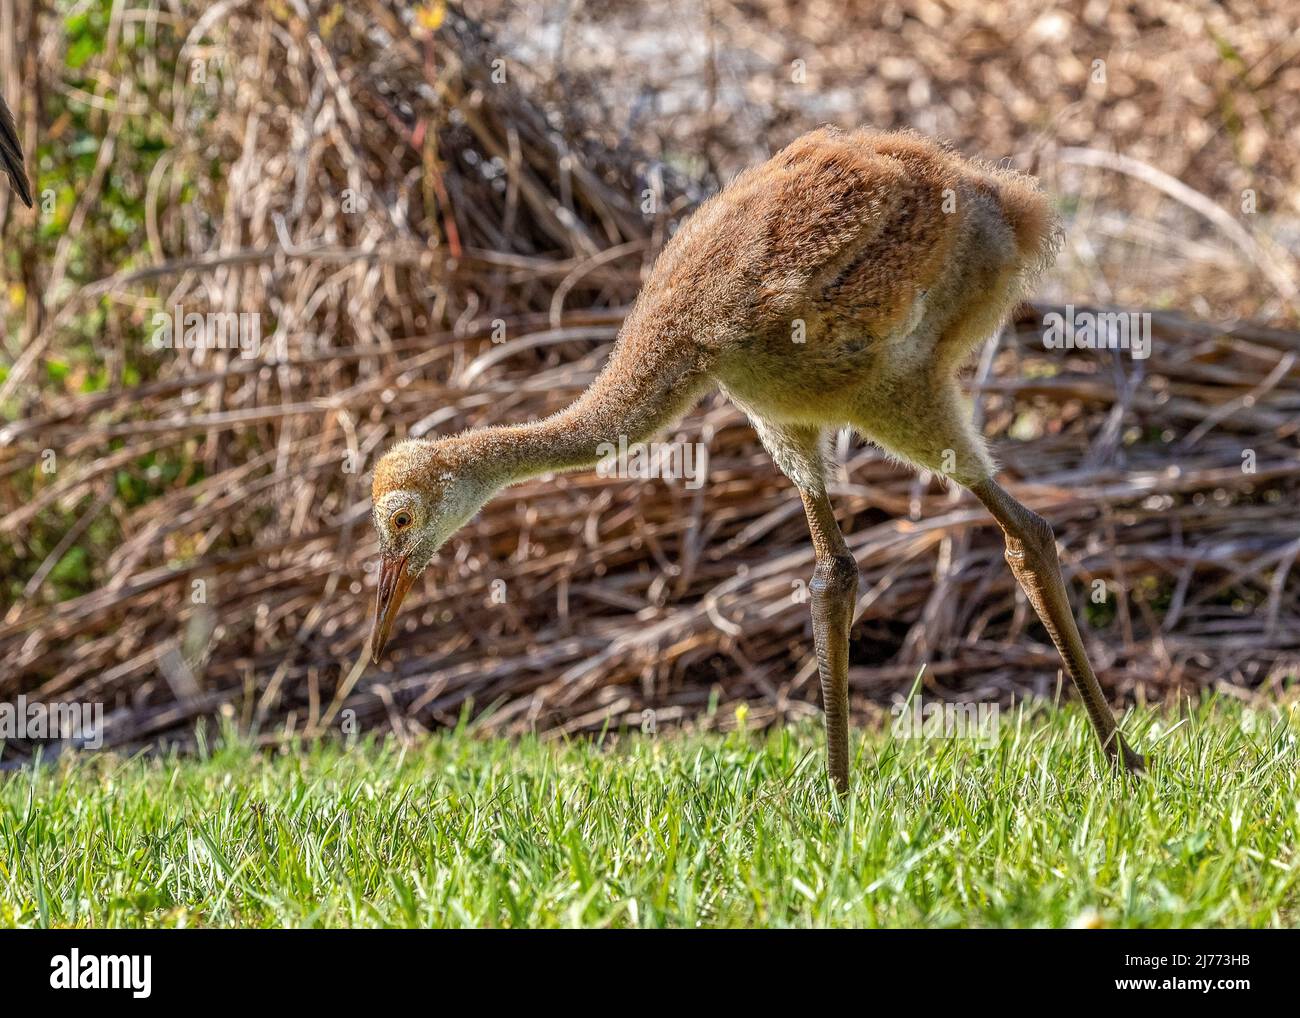 A young Sandhill crane colt learns to find food on it's own Stock Photo